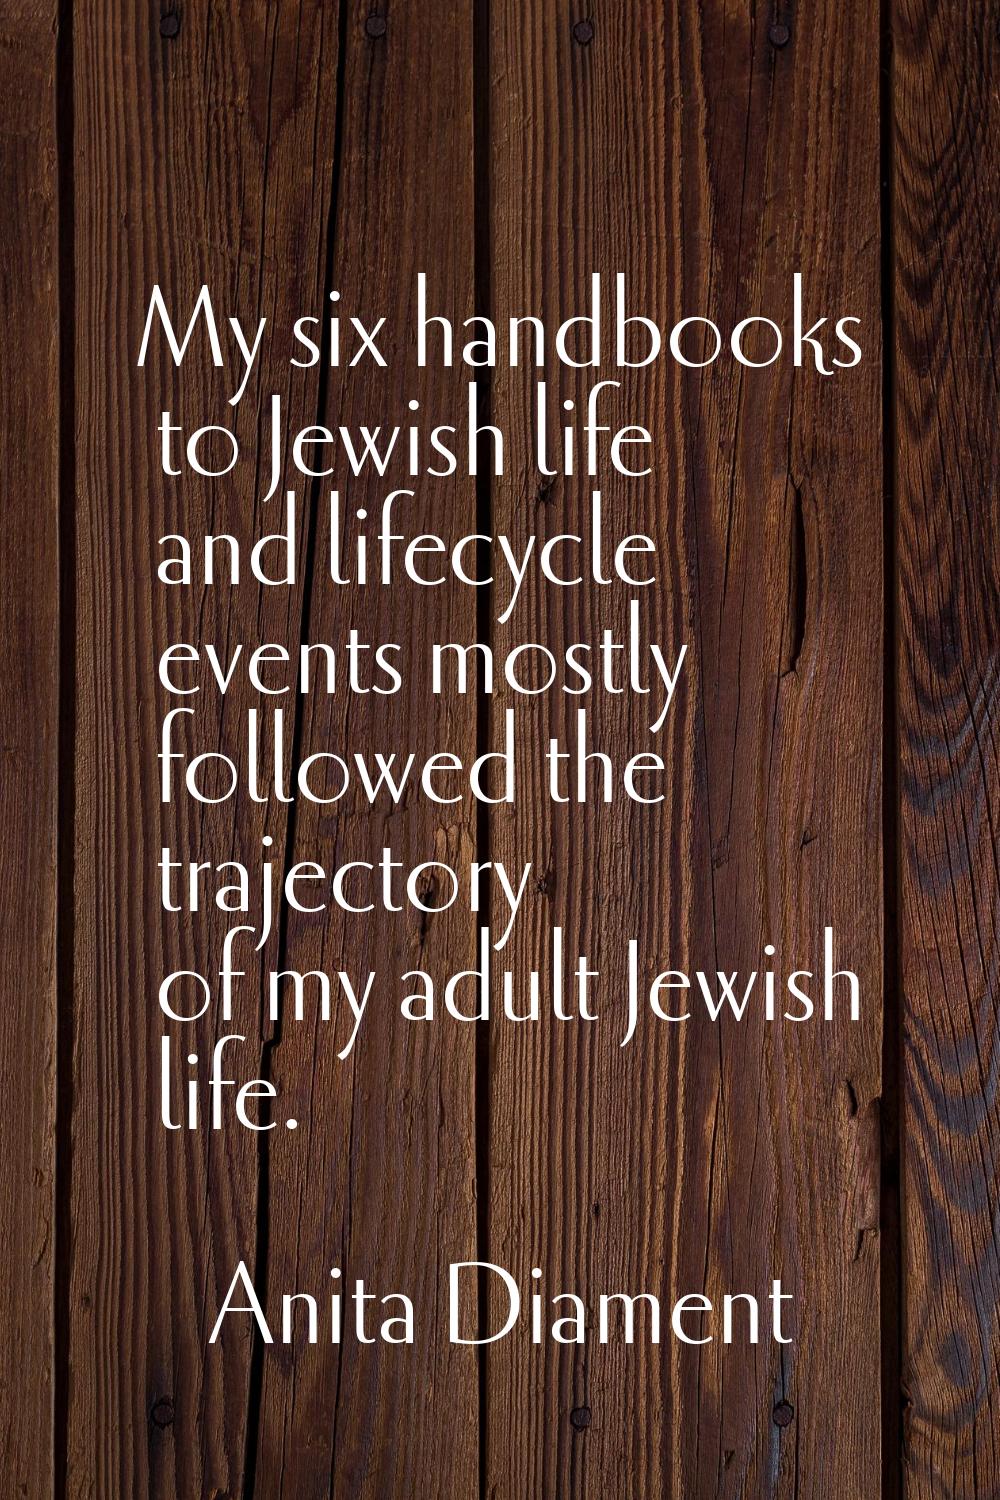 My six handbooks to Jewish life and lifecycle events mostly followed the trajectory of my adult Jew